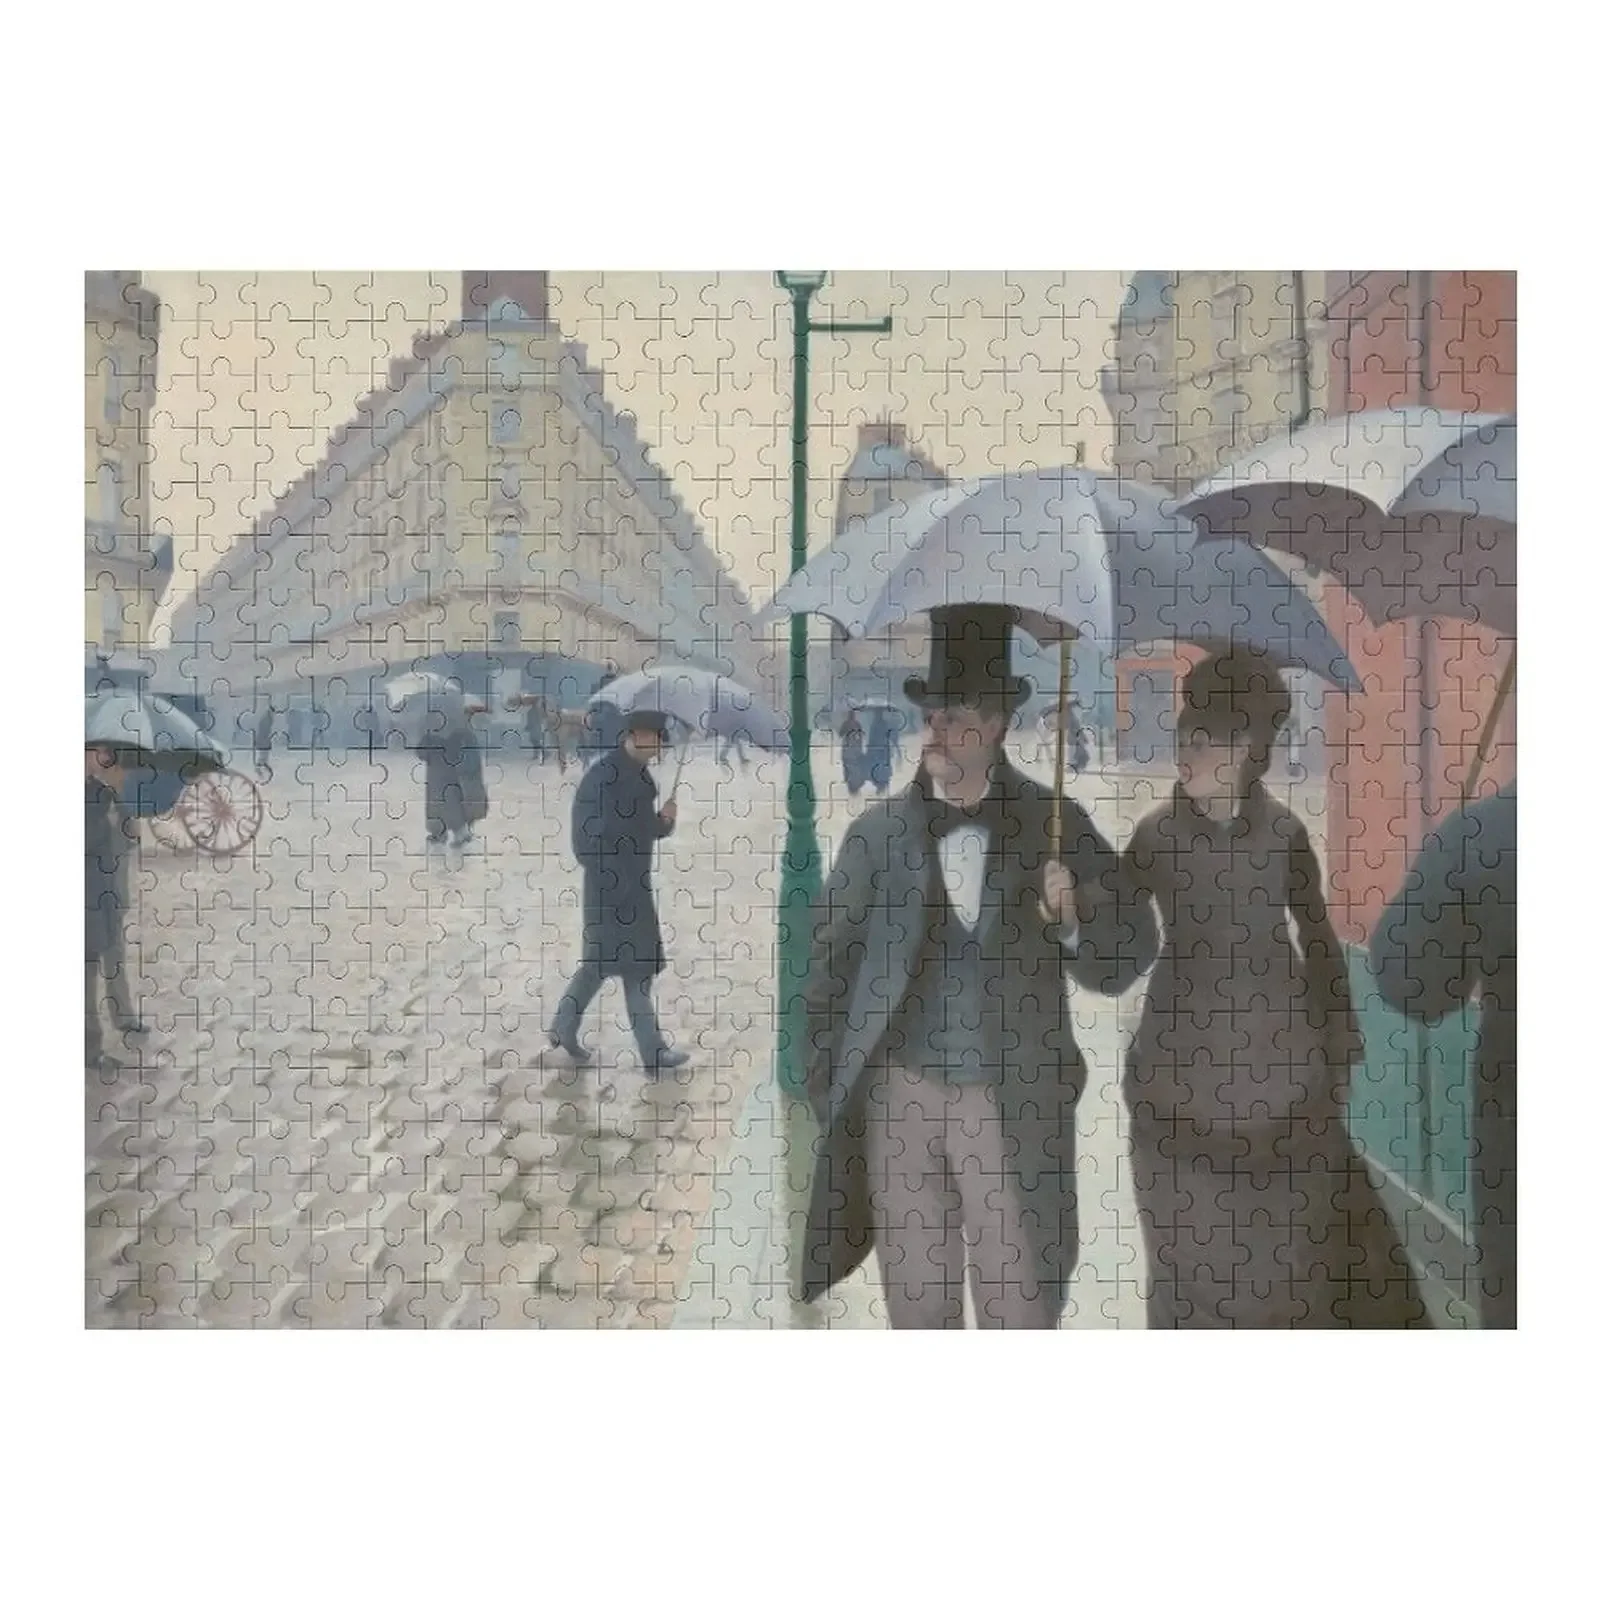 Fine Art: Gustave Caillebotte - Paris Street In Rainy Weather Jigsaw Puzzle For Children Scale Motors Jigsaw Custom Puzzle tianmen mountain 1977 f 150 diecast model car street weapon 1 64 hoonitruck ken block model number scale battery type features